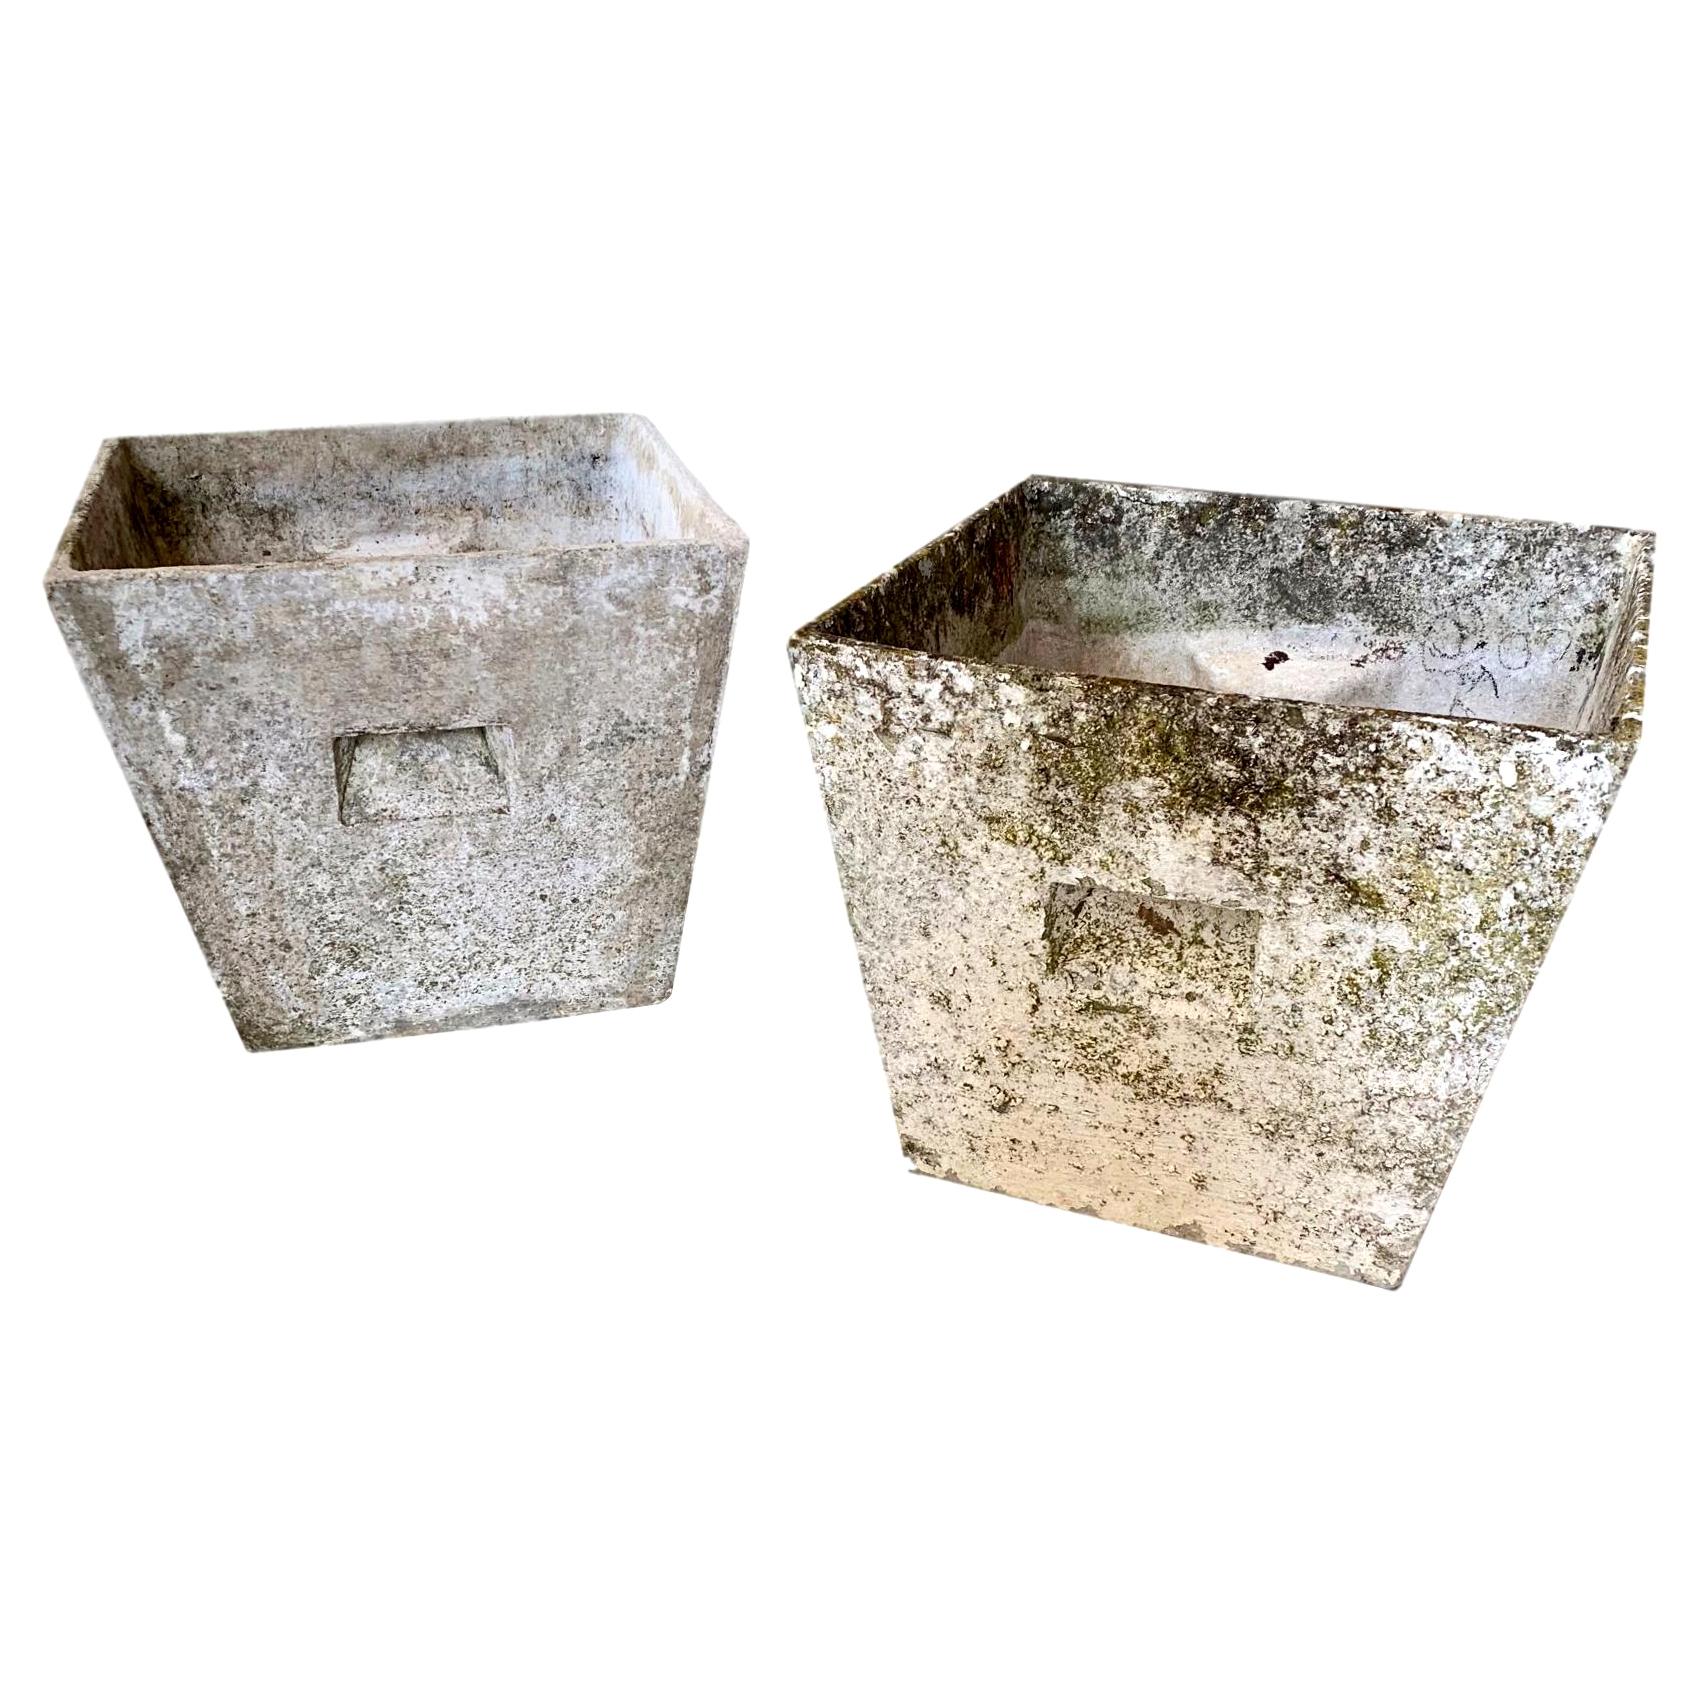  Willy Guhl Petite Box Planters  For Sale